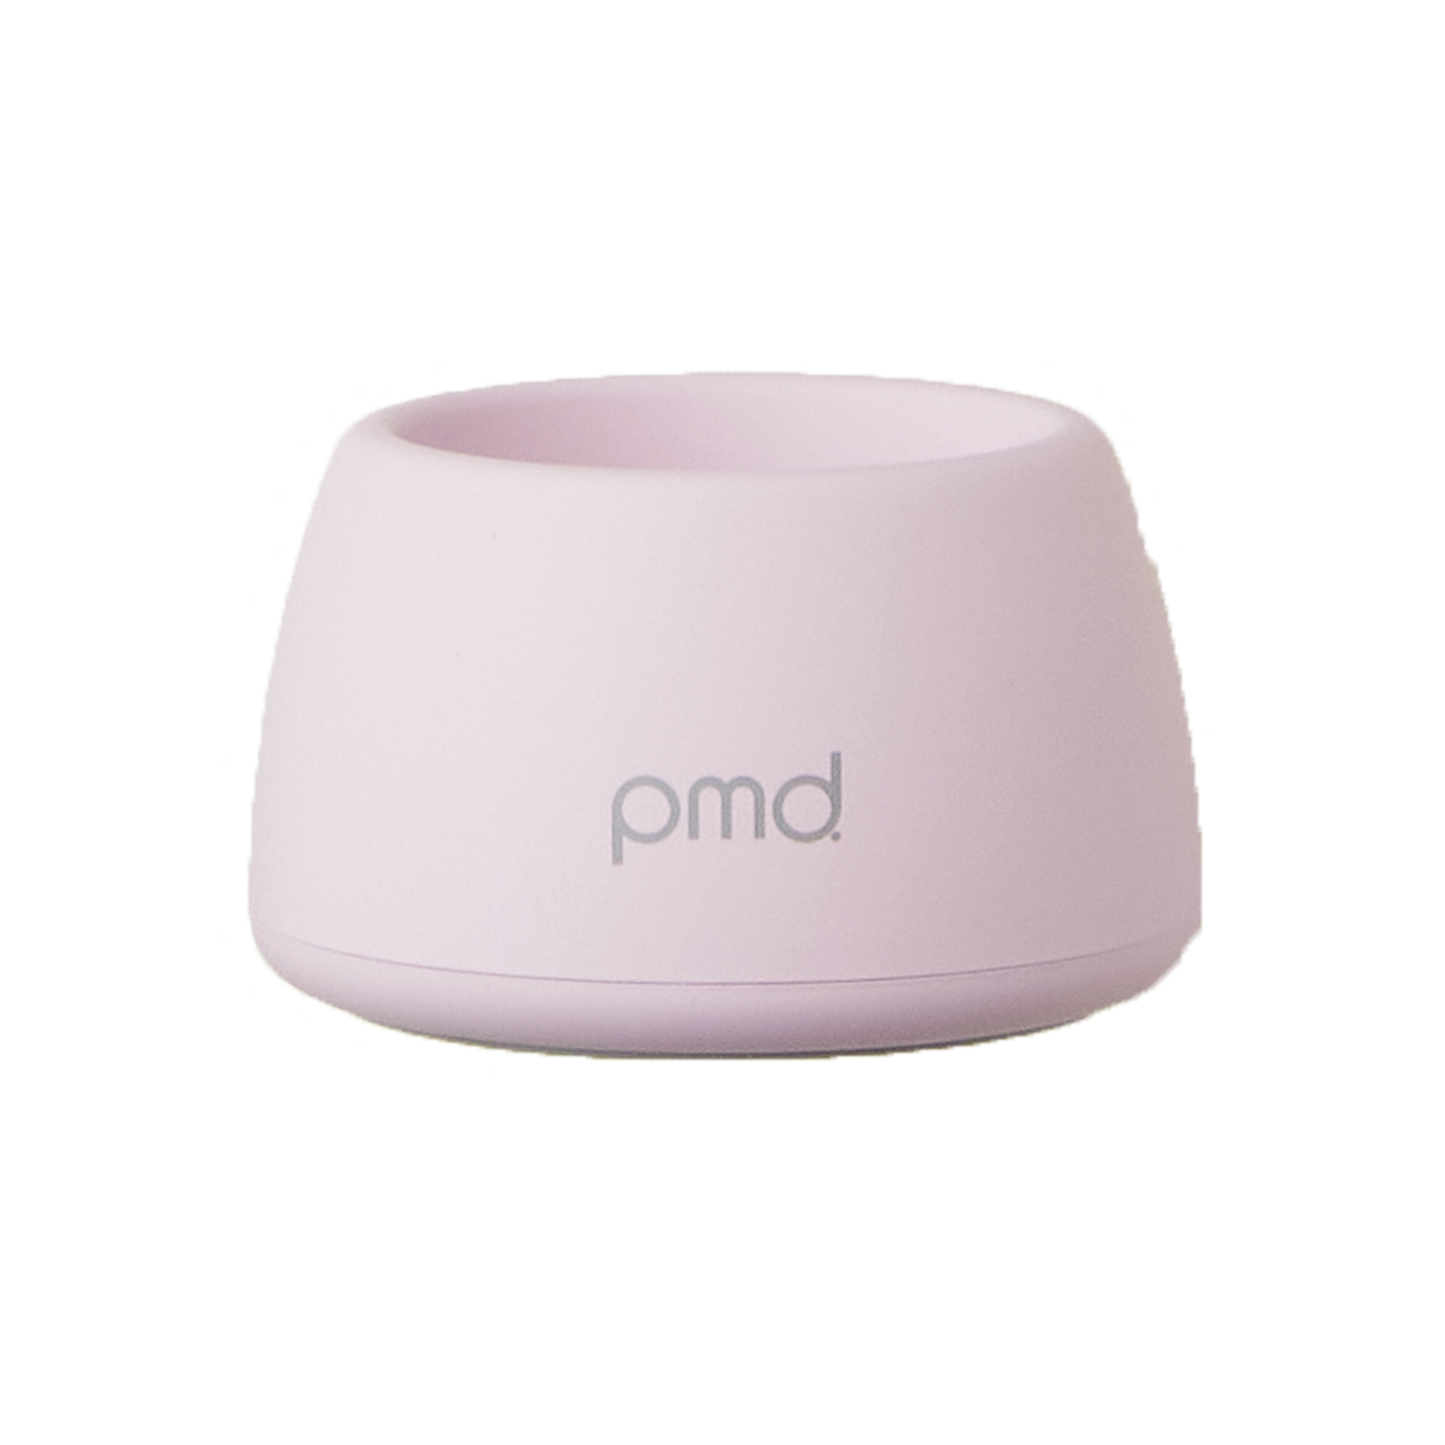 Personal Microderm Elite Pro Charging Base